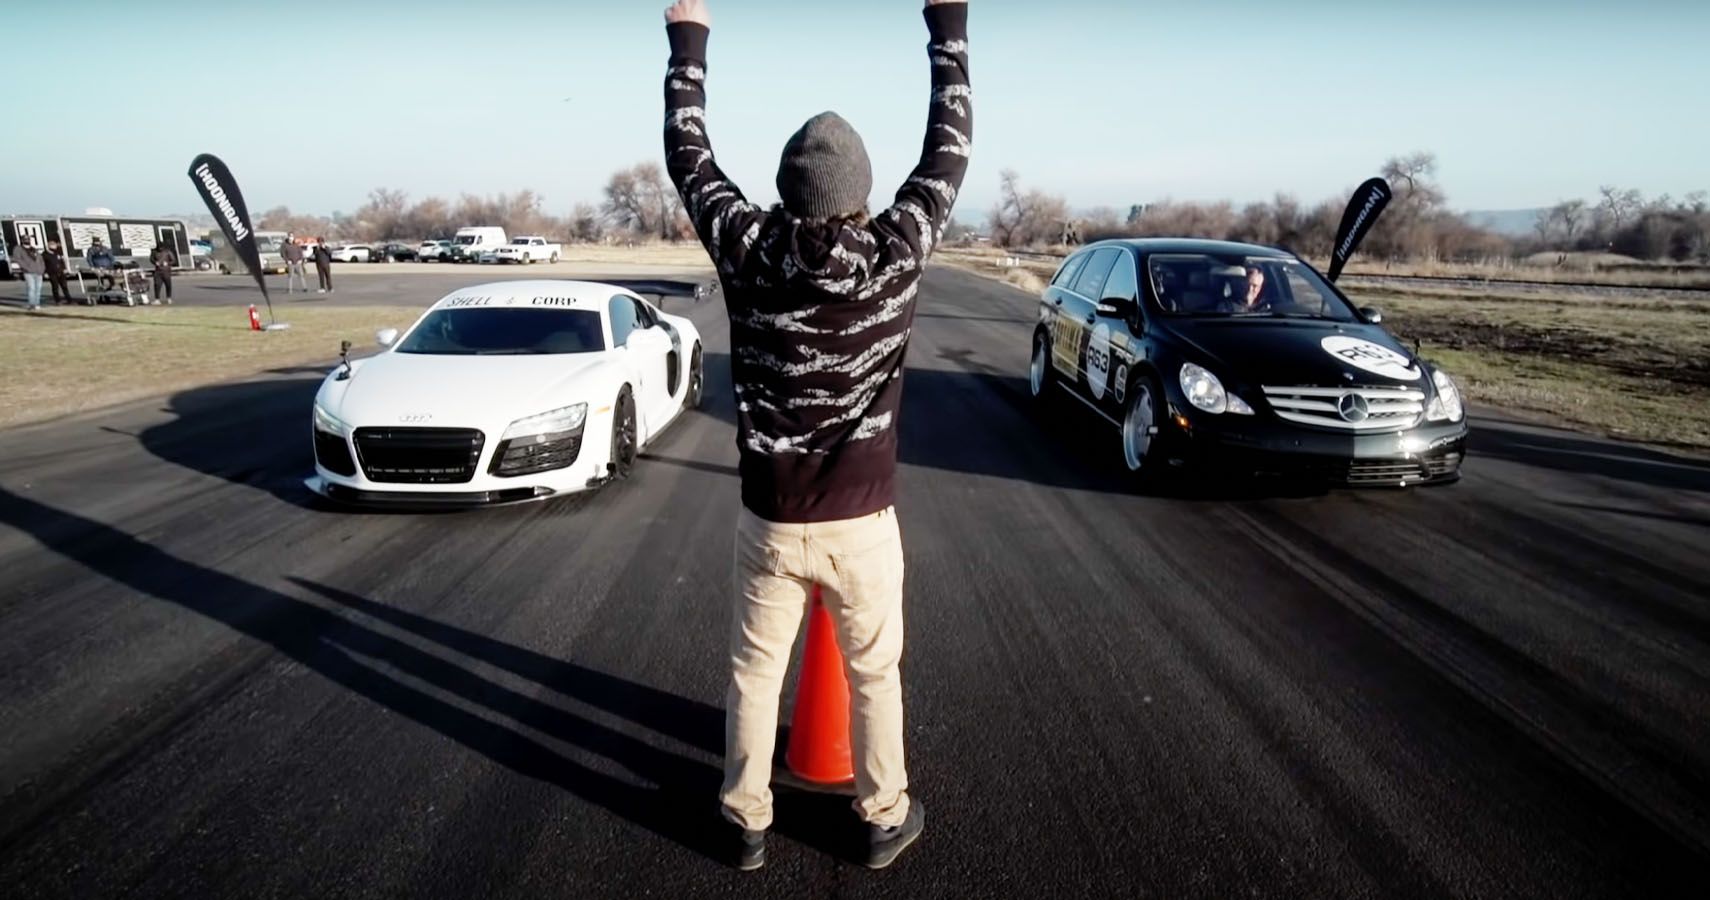 Watch The World's Fastest Minivan Drag Race A Supercharged Audi R8